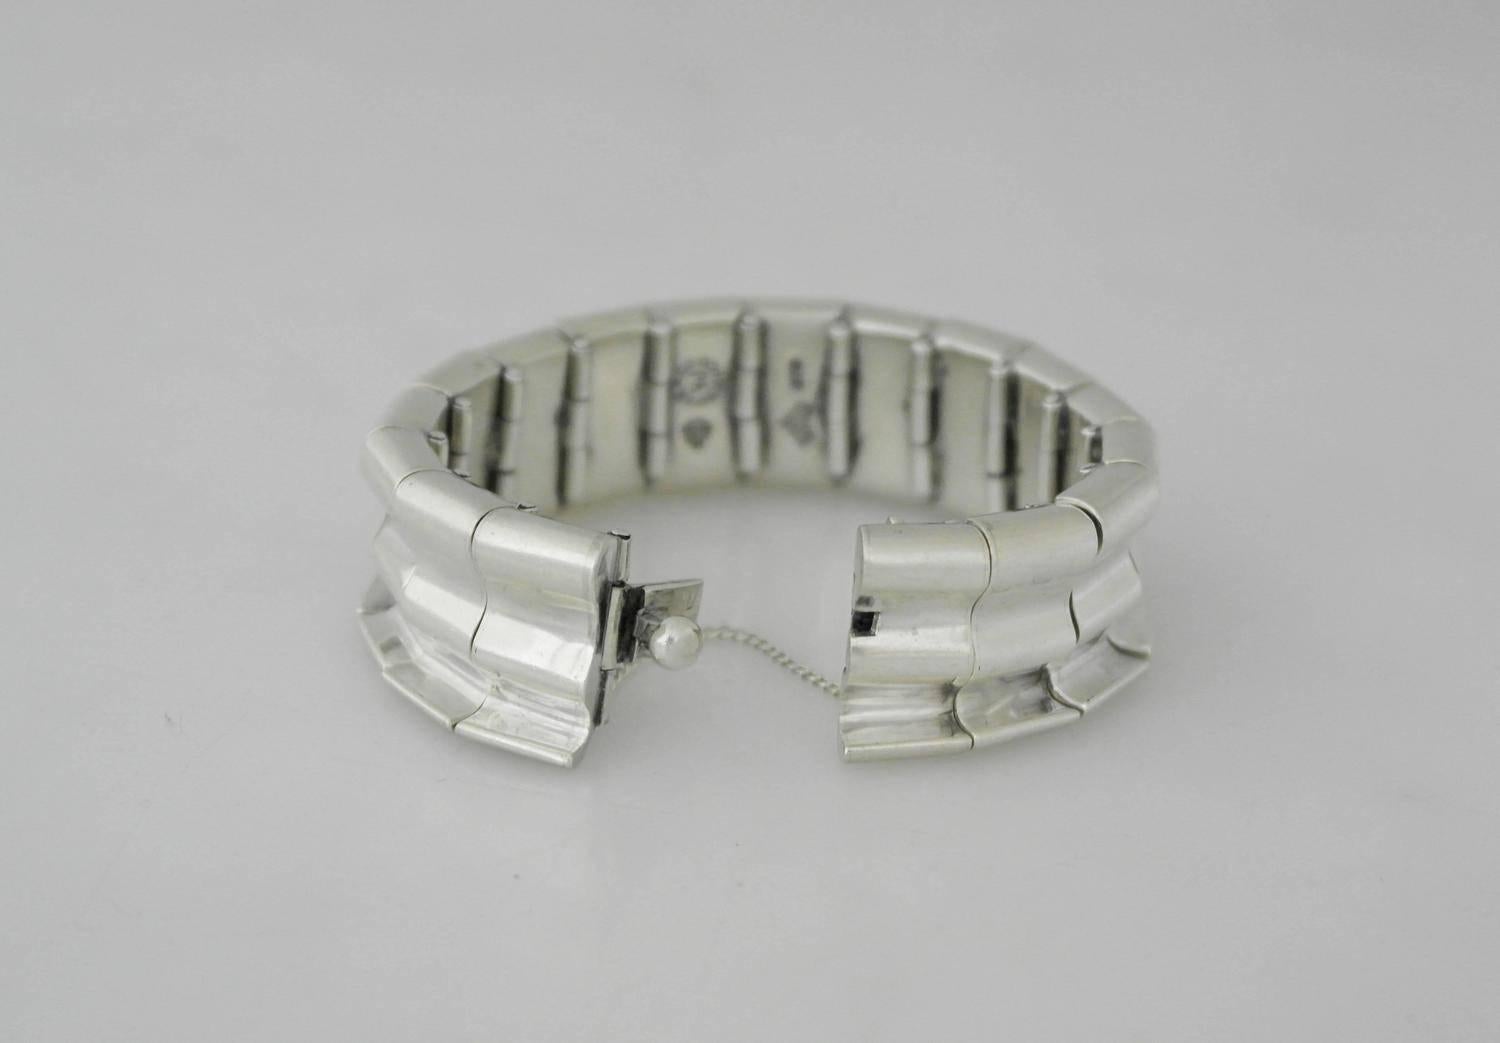 Being offered is a circa 1960 .970 silver (better than sterling) bracelet by Antonio Pineda of Taxco, Mexico. Heavy gauge modernist piece; links having a curved design. Dimensions: 3/4 inch wide x 6 1/2 wearable inches. Marked as illustrated. In